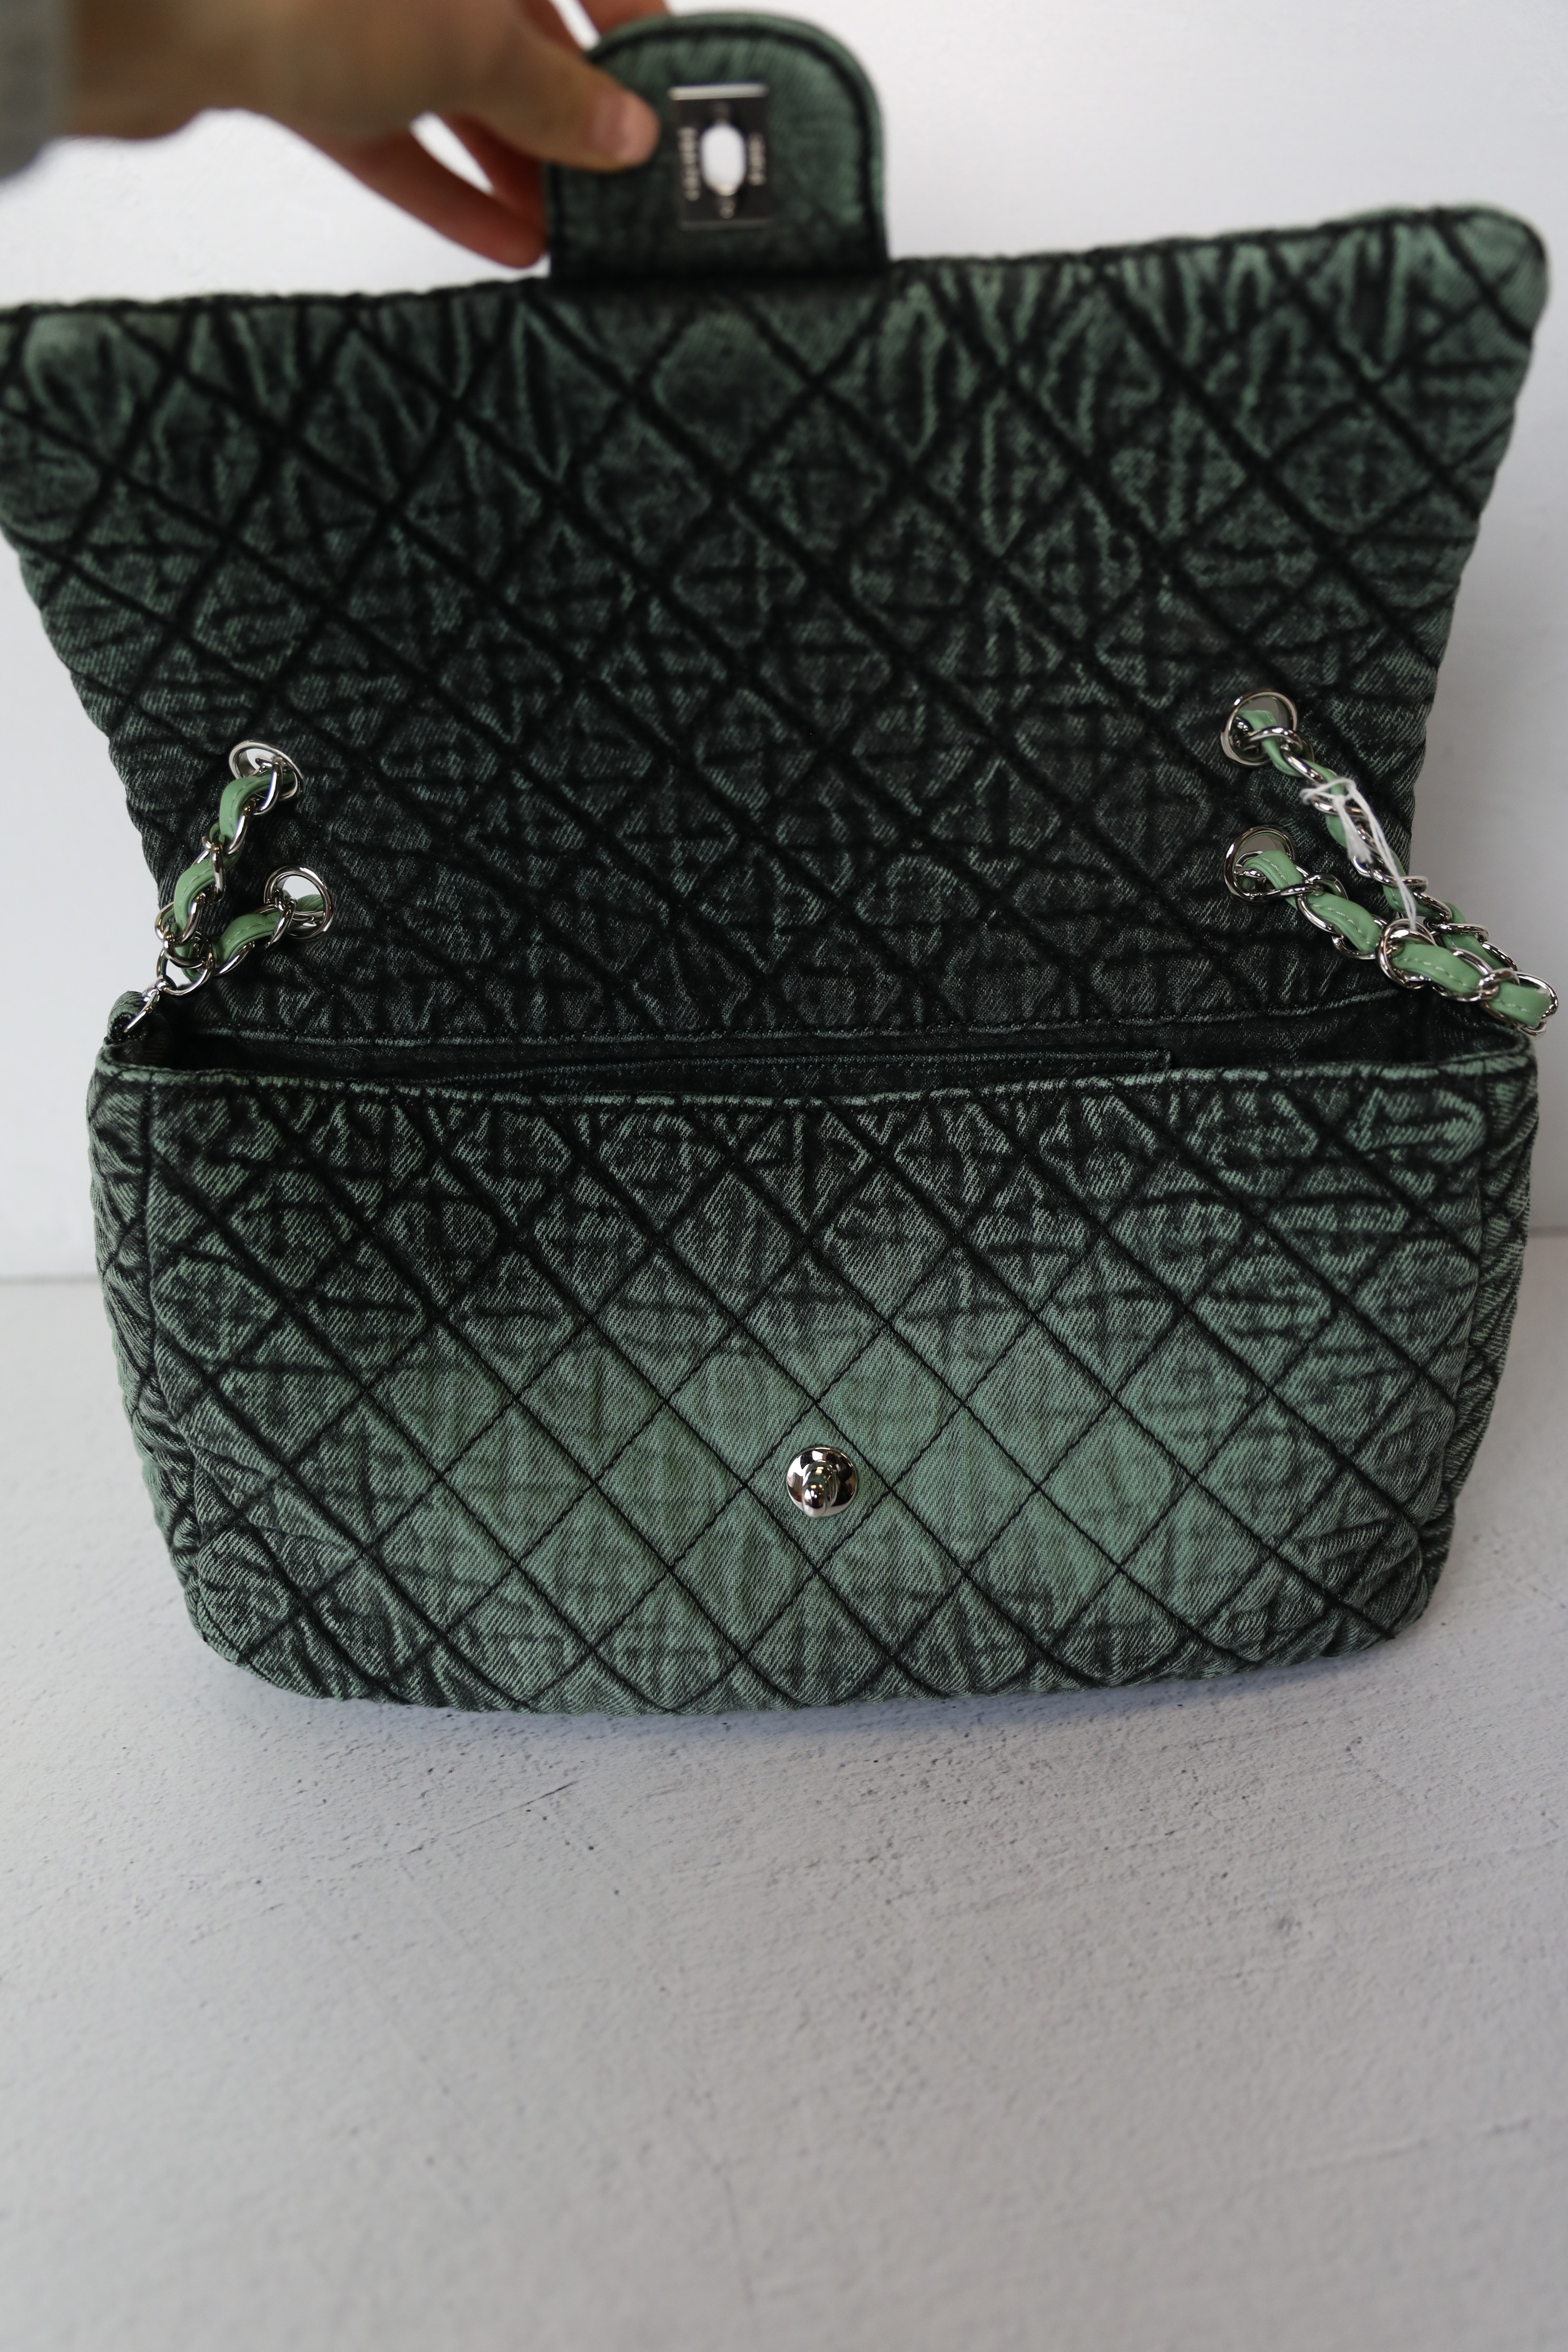 Chanel Denimpressions Flap Large, Green Denim with Silver Hardware